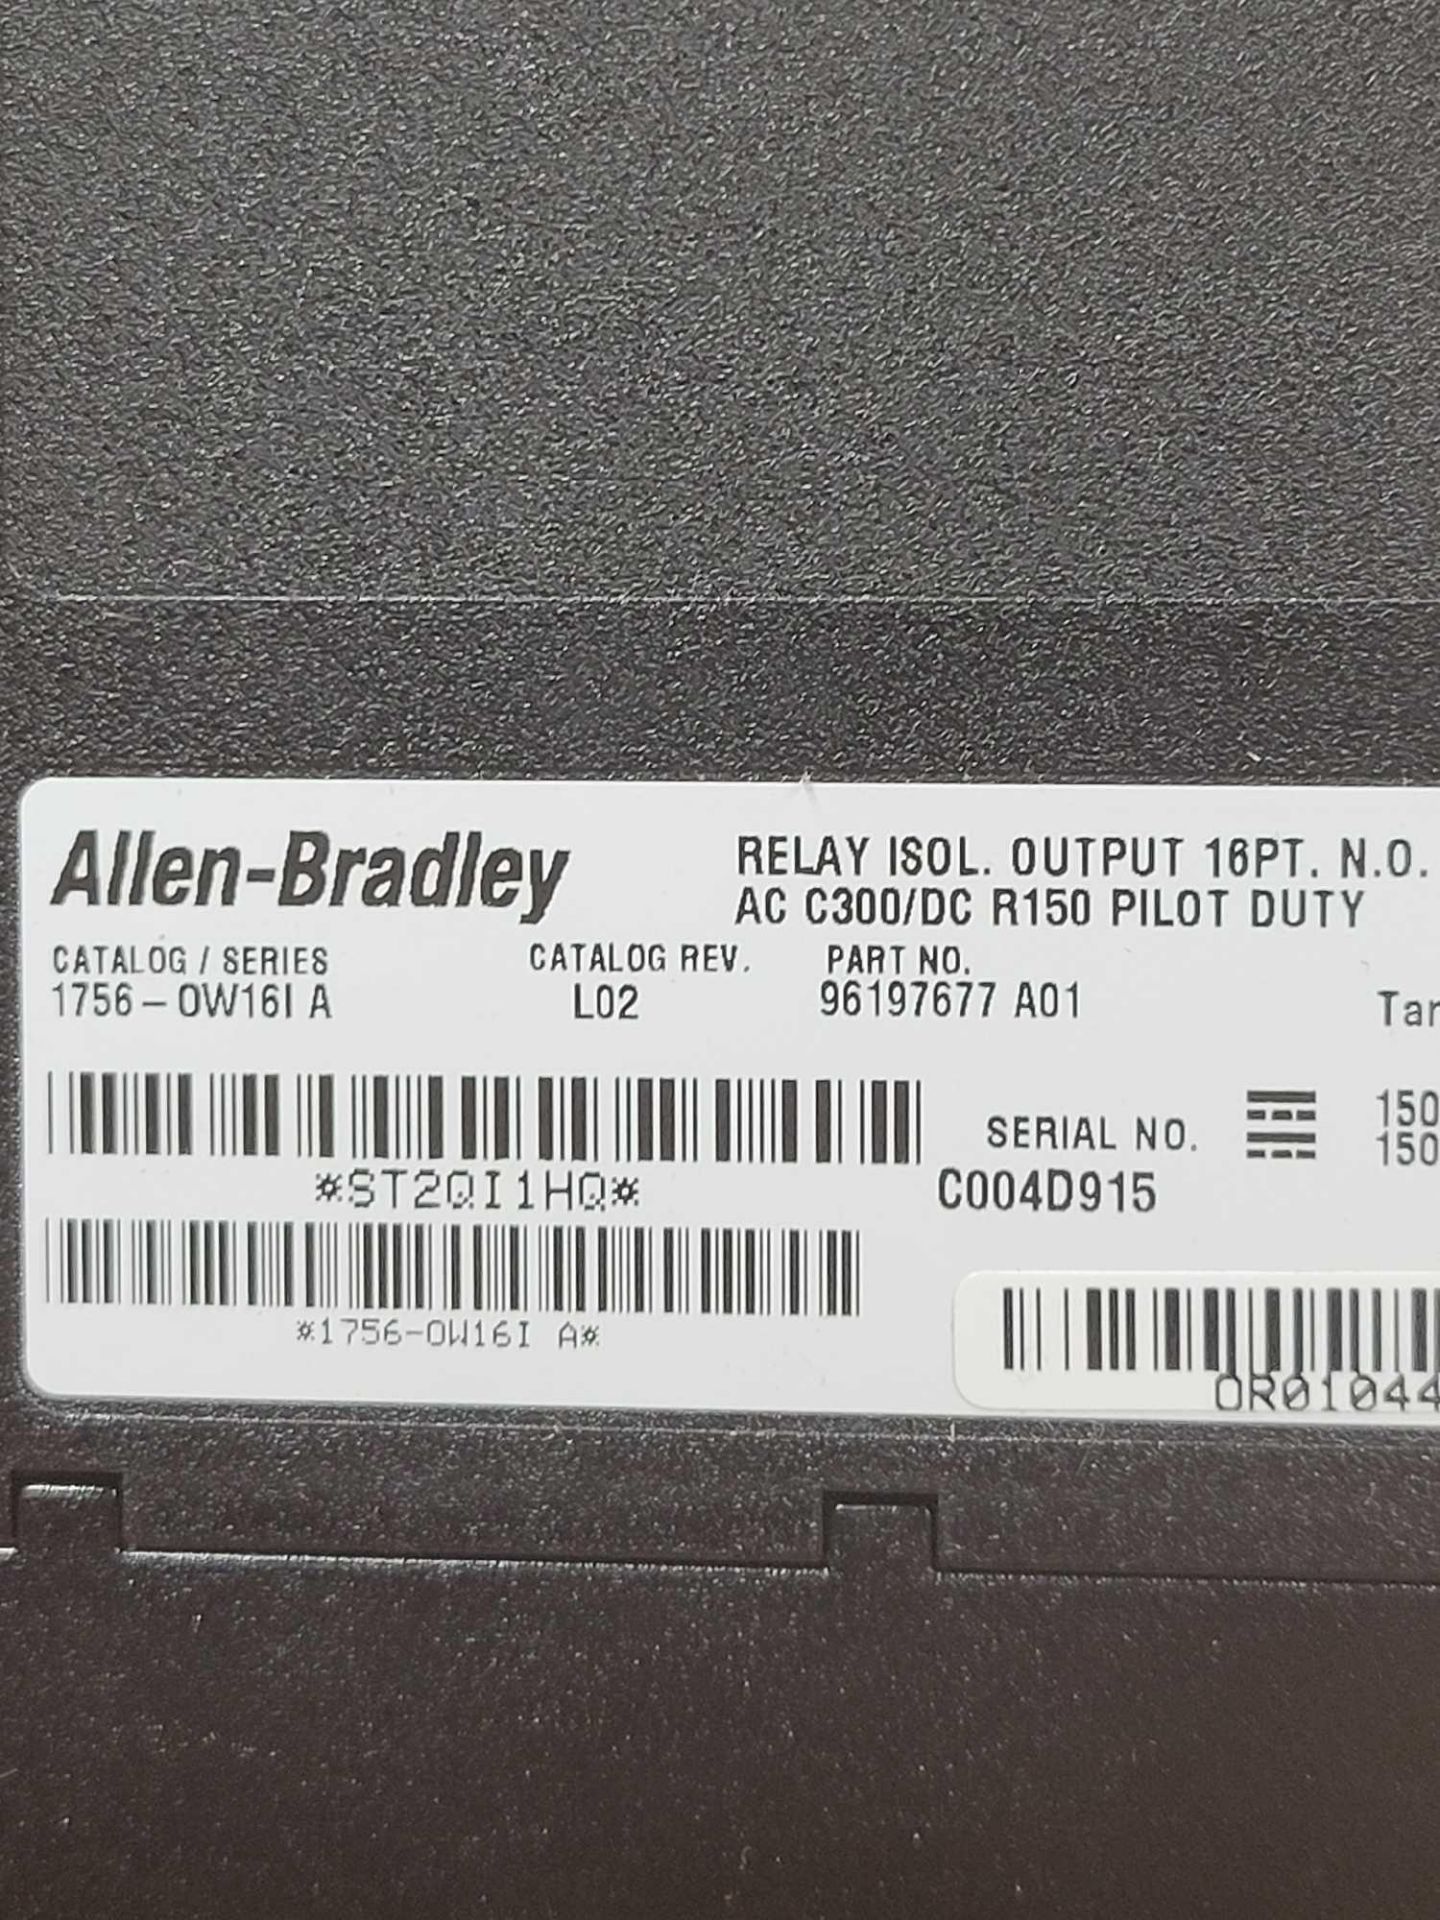 ALLEN BRADLEY 1756-OW16I / Series A Isolated Relay Output Module  /  Lot Weight: 0.6 lbs - Image 6 of 6